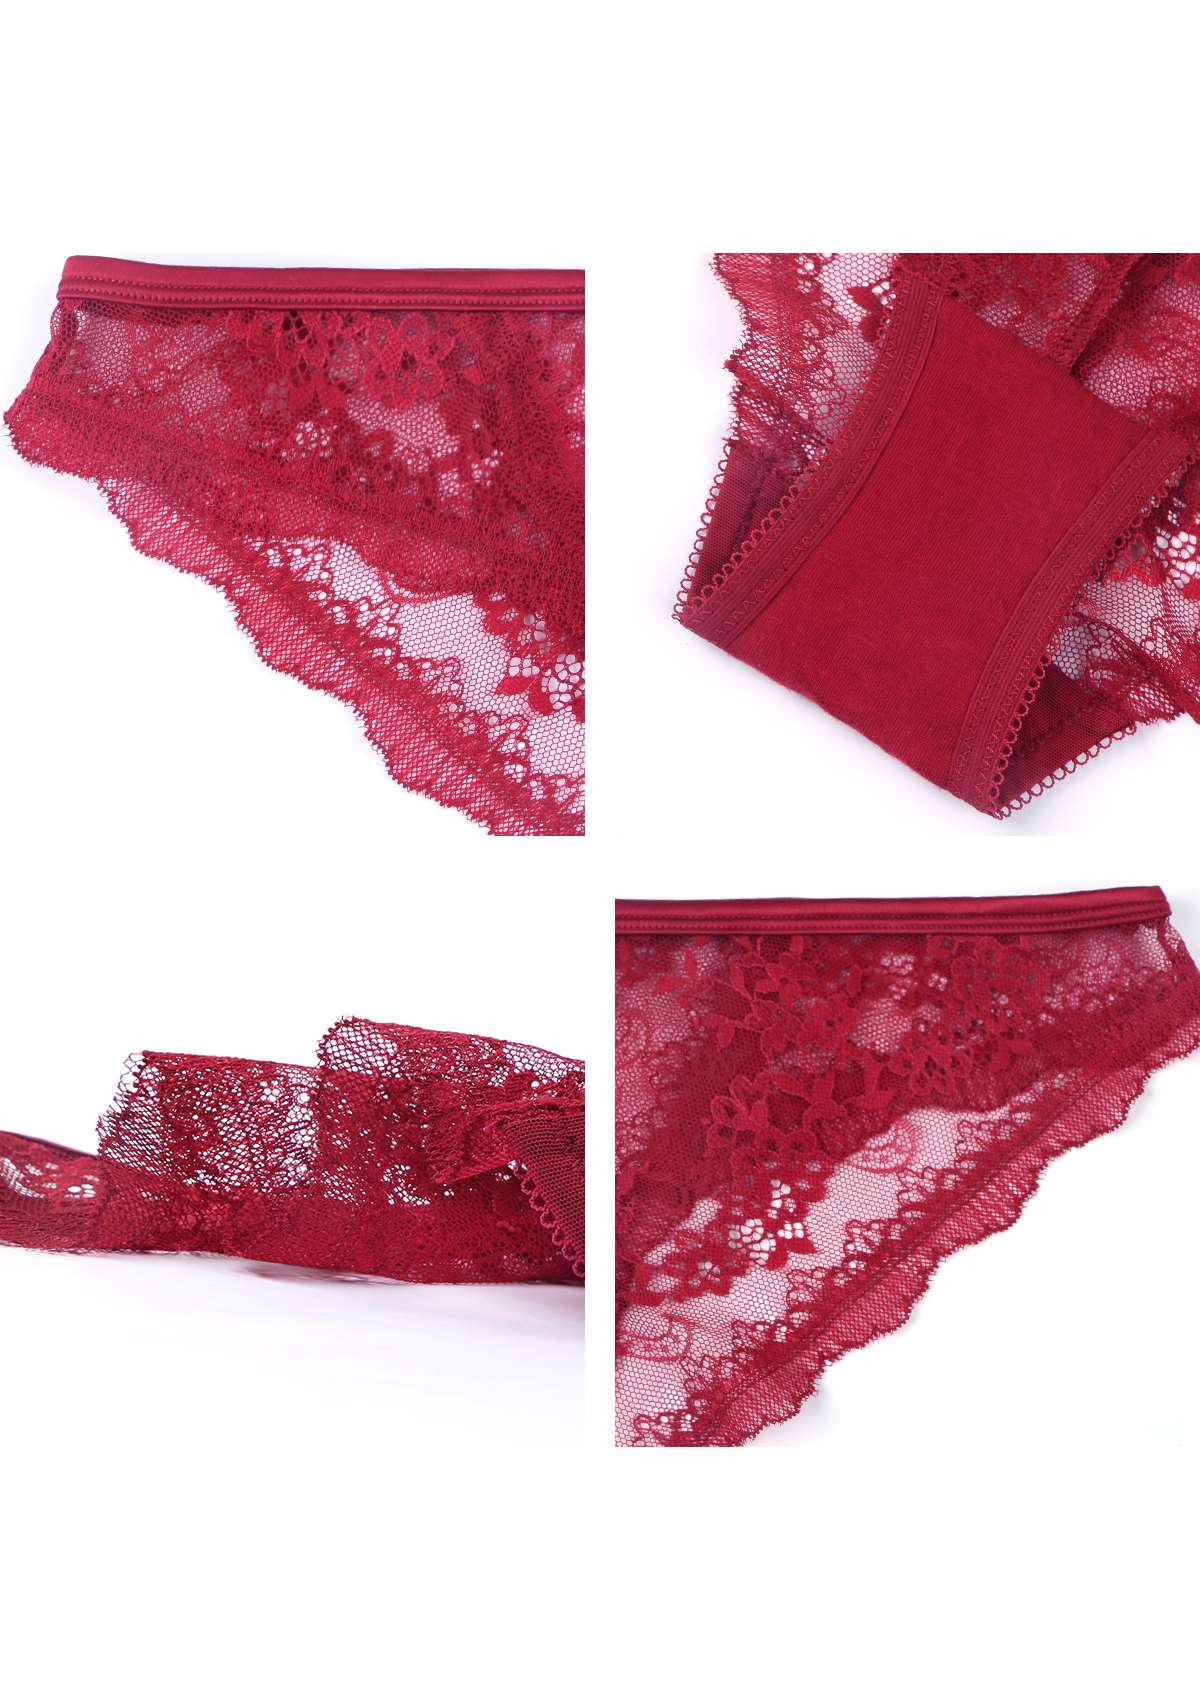 HSIA Floral Bridal Lace Back Sheer Sophisticated Cheeky Underwear  - Burgundy / S